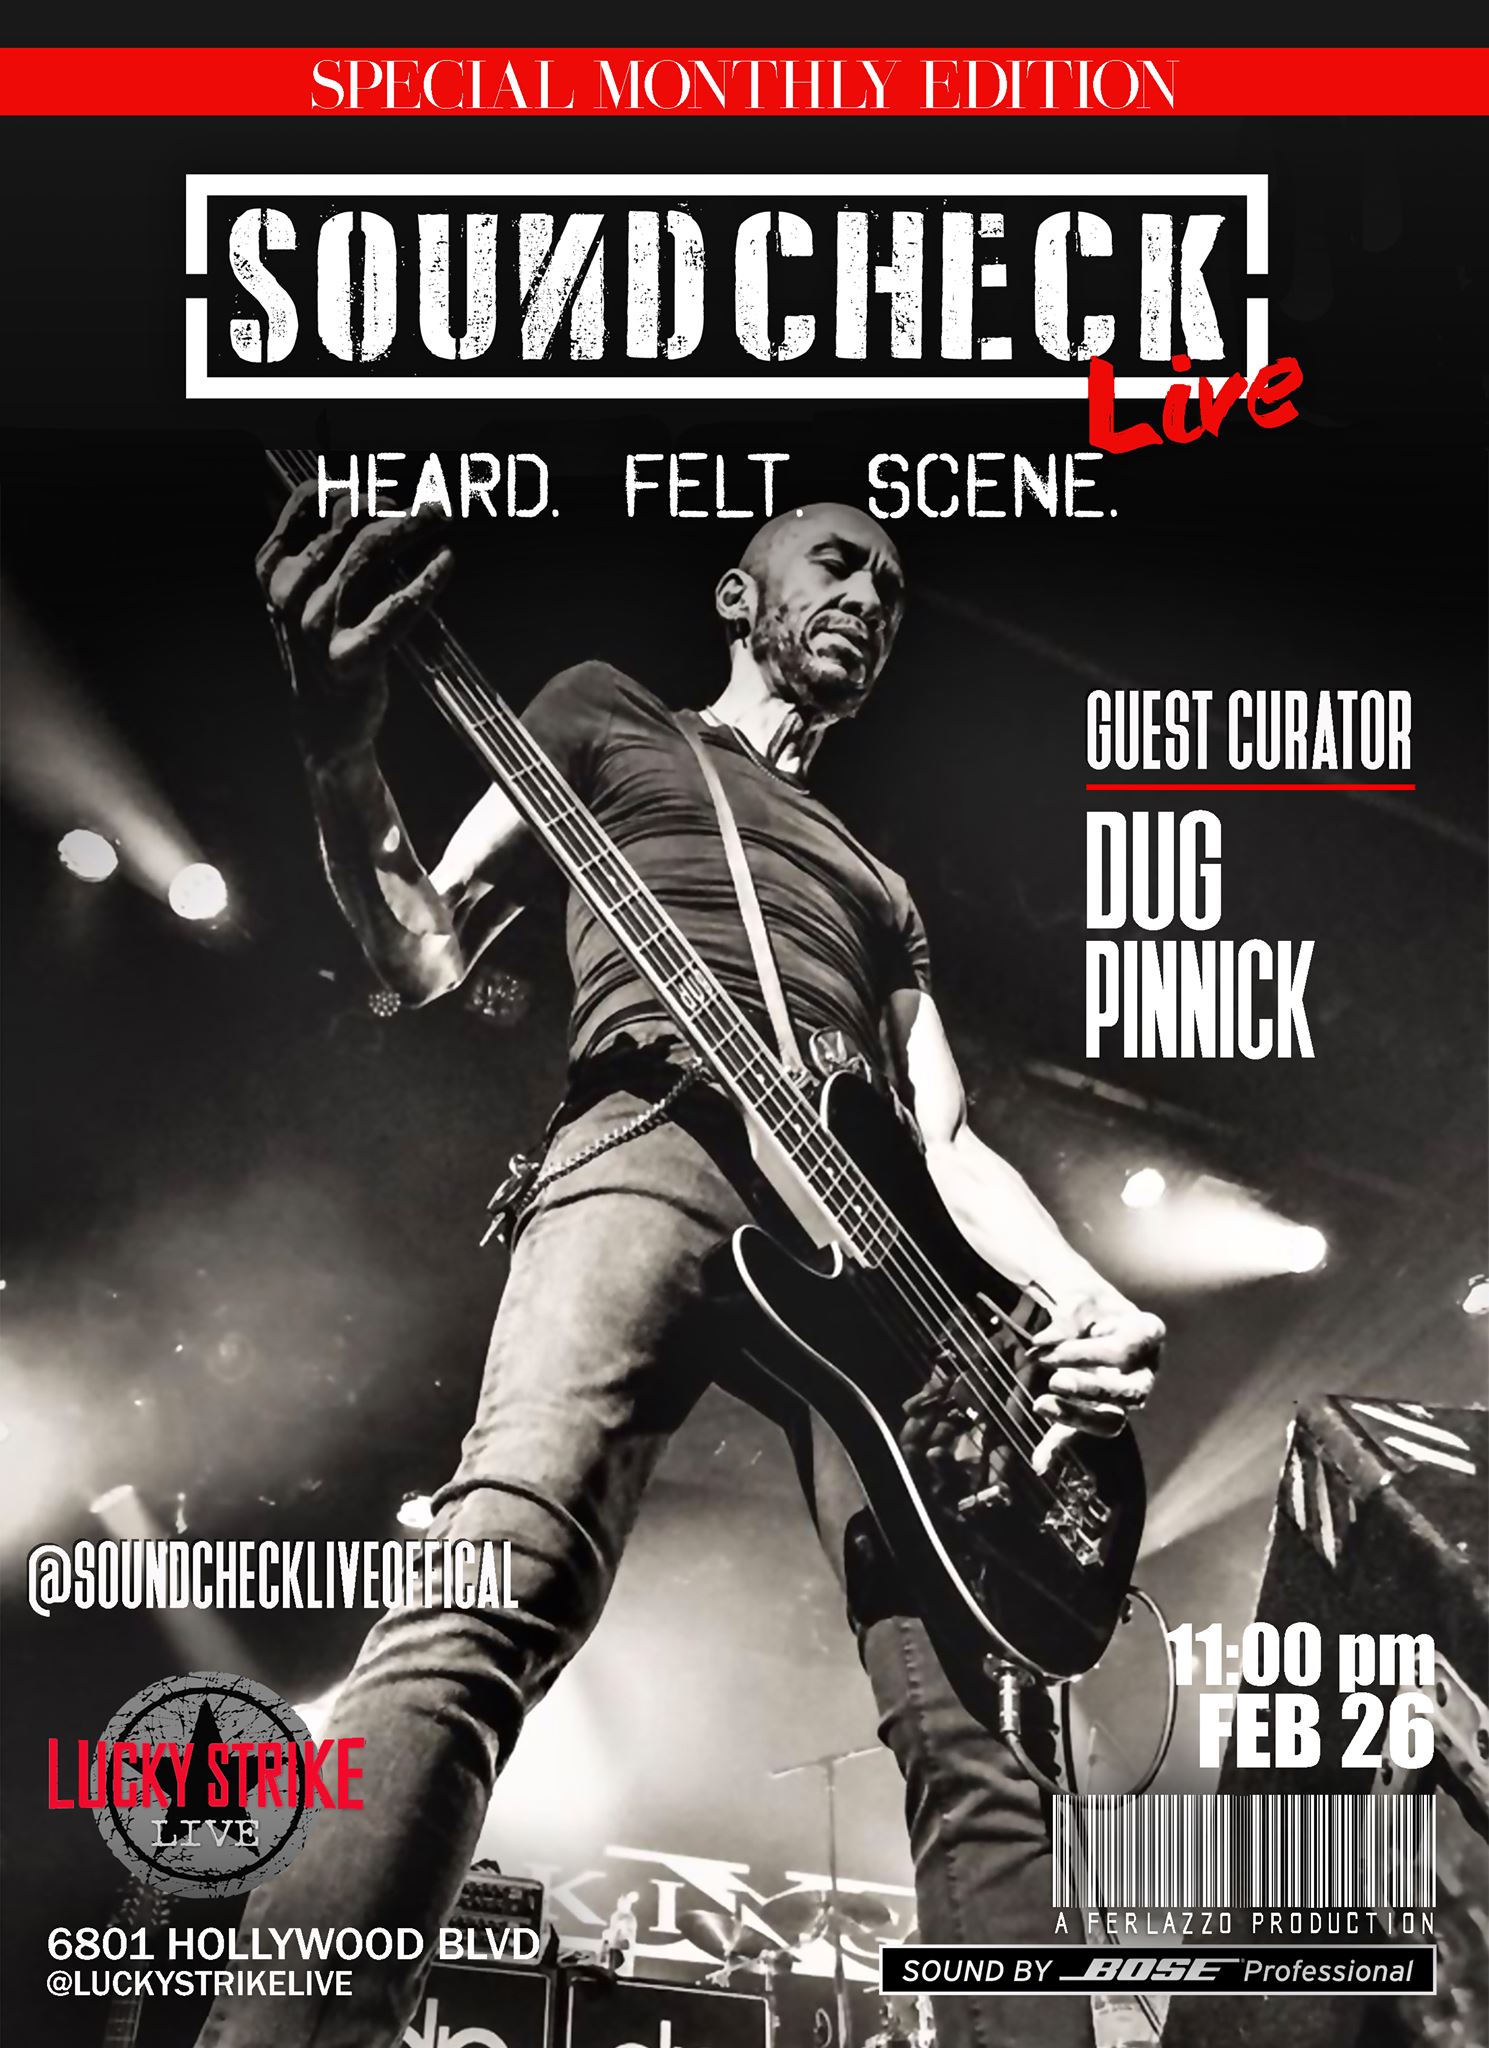 Dug Pinnick This Month's Guest Curator For Soundcheck Live